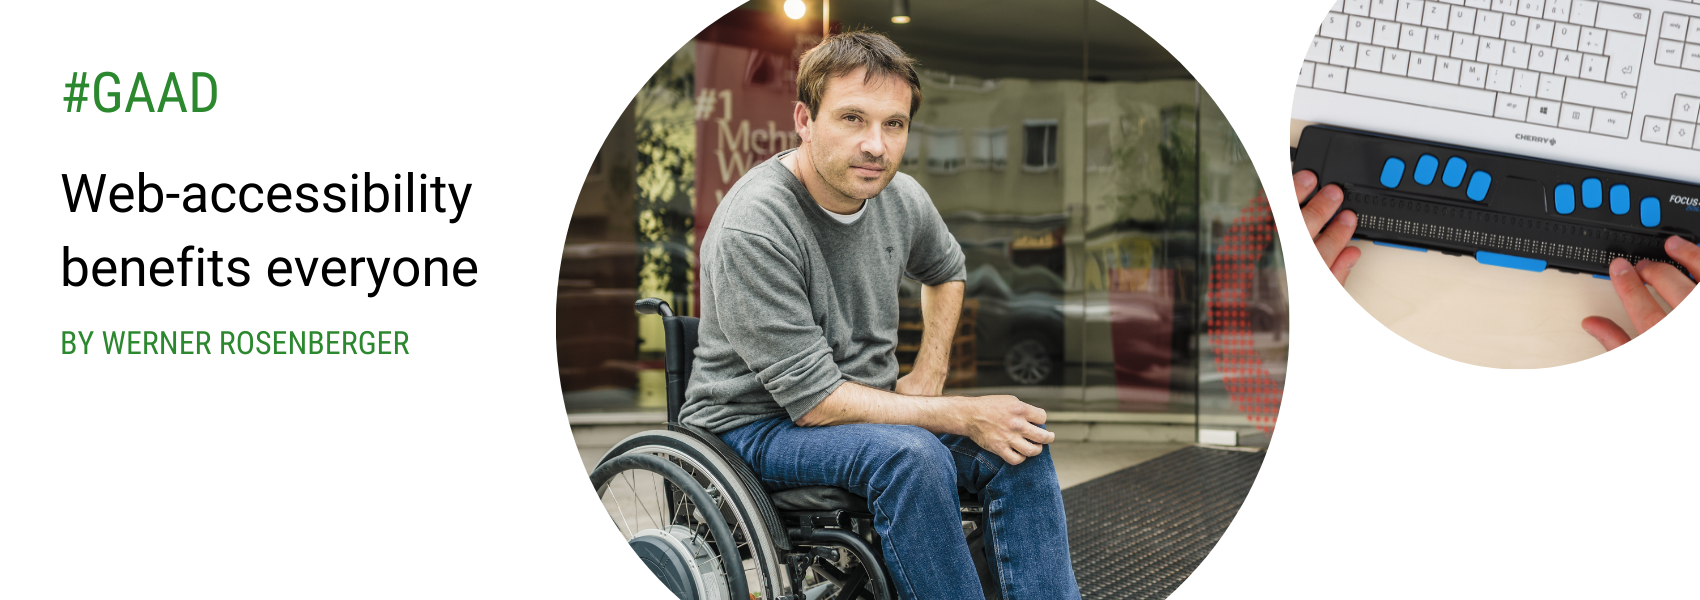 Text: #GAAD "Web-accessibility benefits everyone", by Werner Rosenberger. Photos: 1) Werner Rosenberger portrait outdoors; sitting in wheelchair and looking at the camera; 2) Regular keyboard next to a Braille keyboard